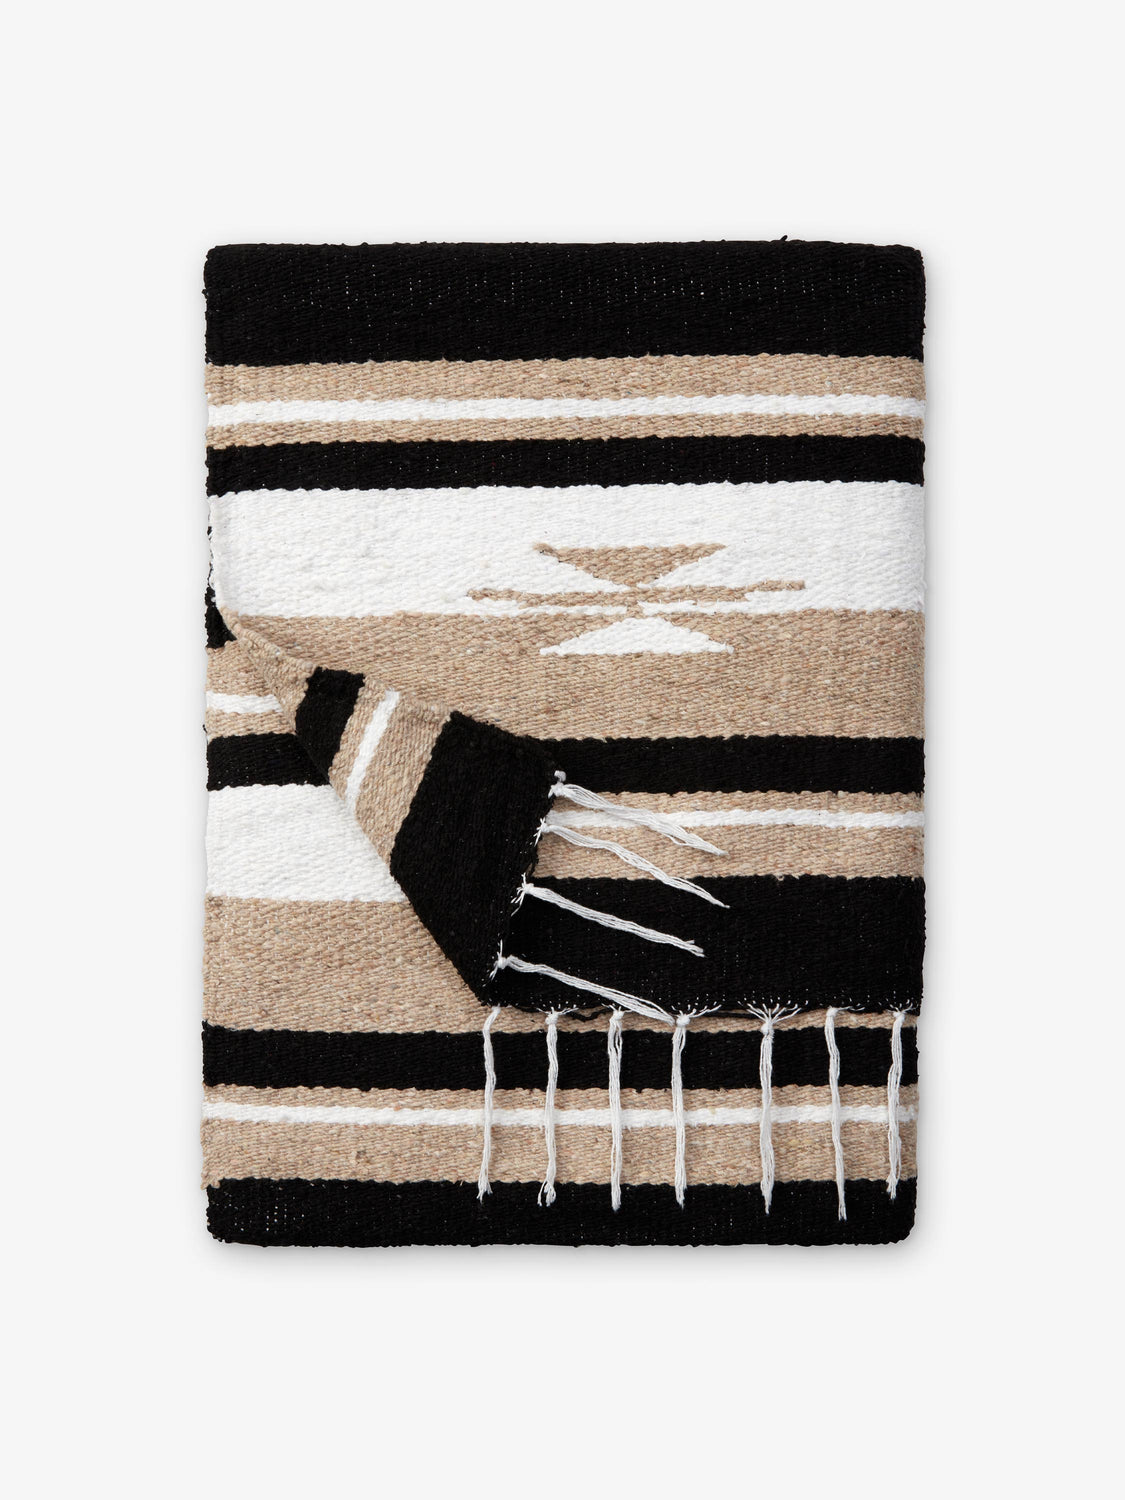 A folded traditional, hand-woven Mexican blanket in black, tan, and white pattern with fringe.